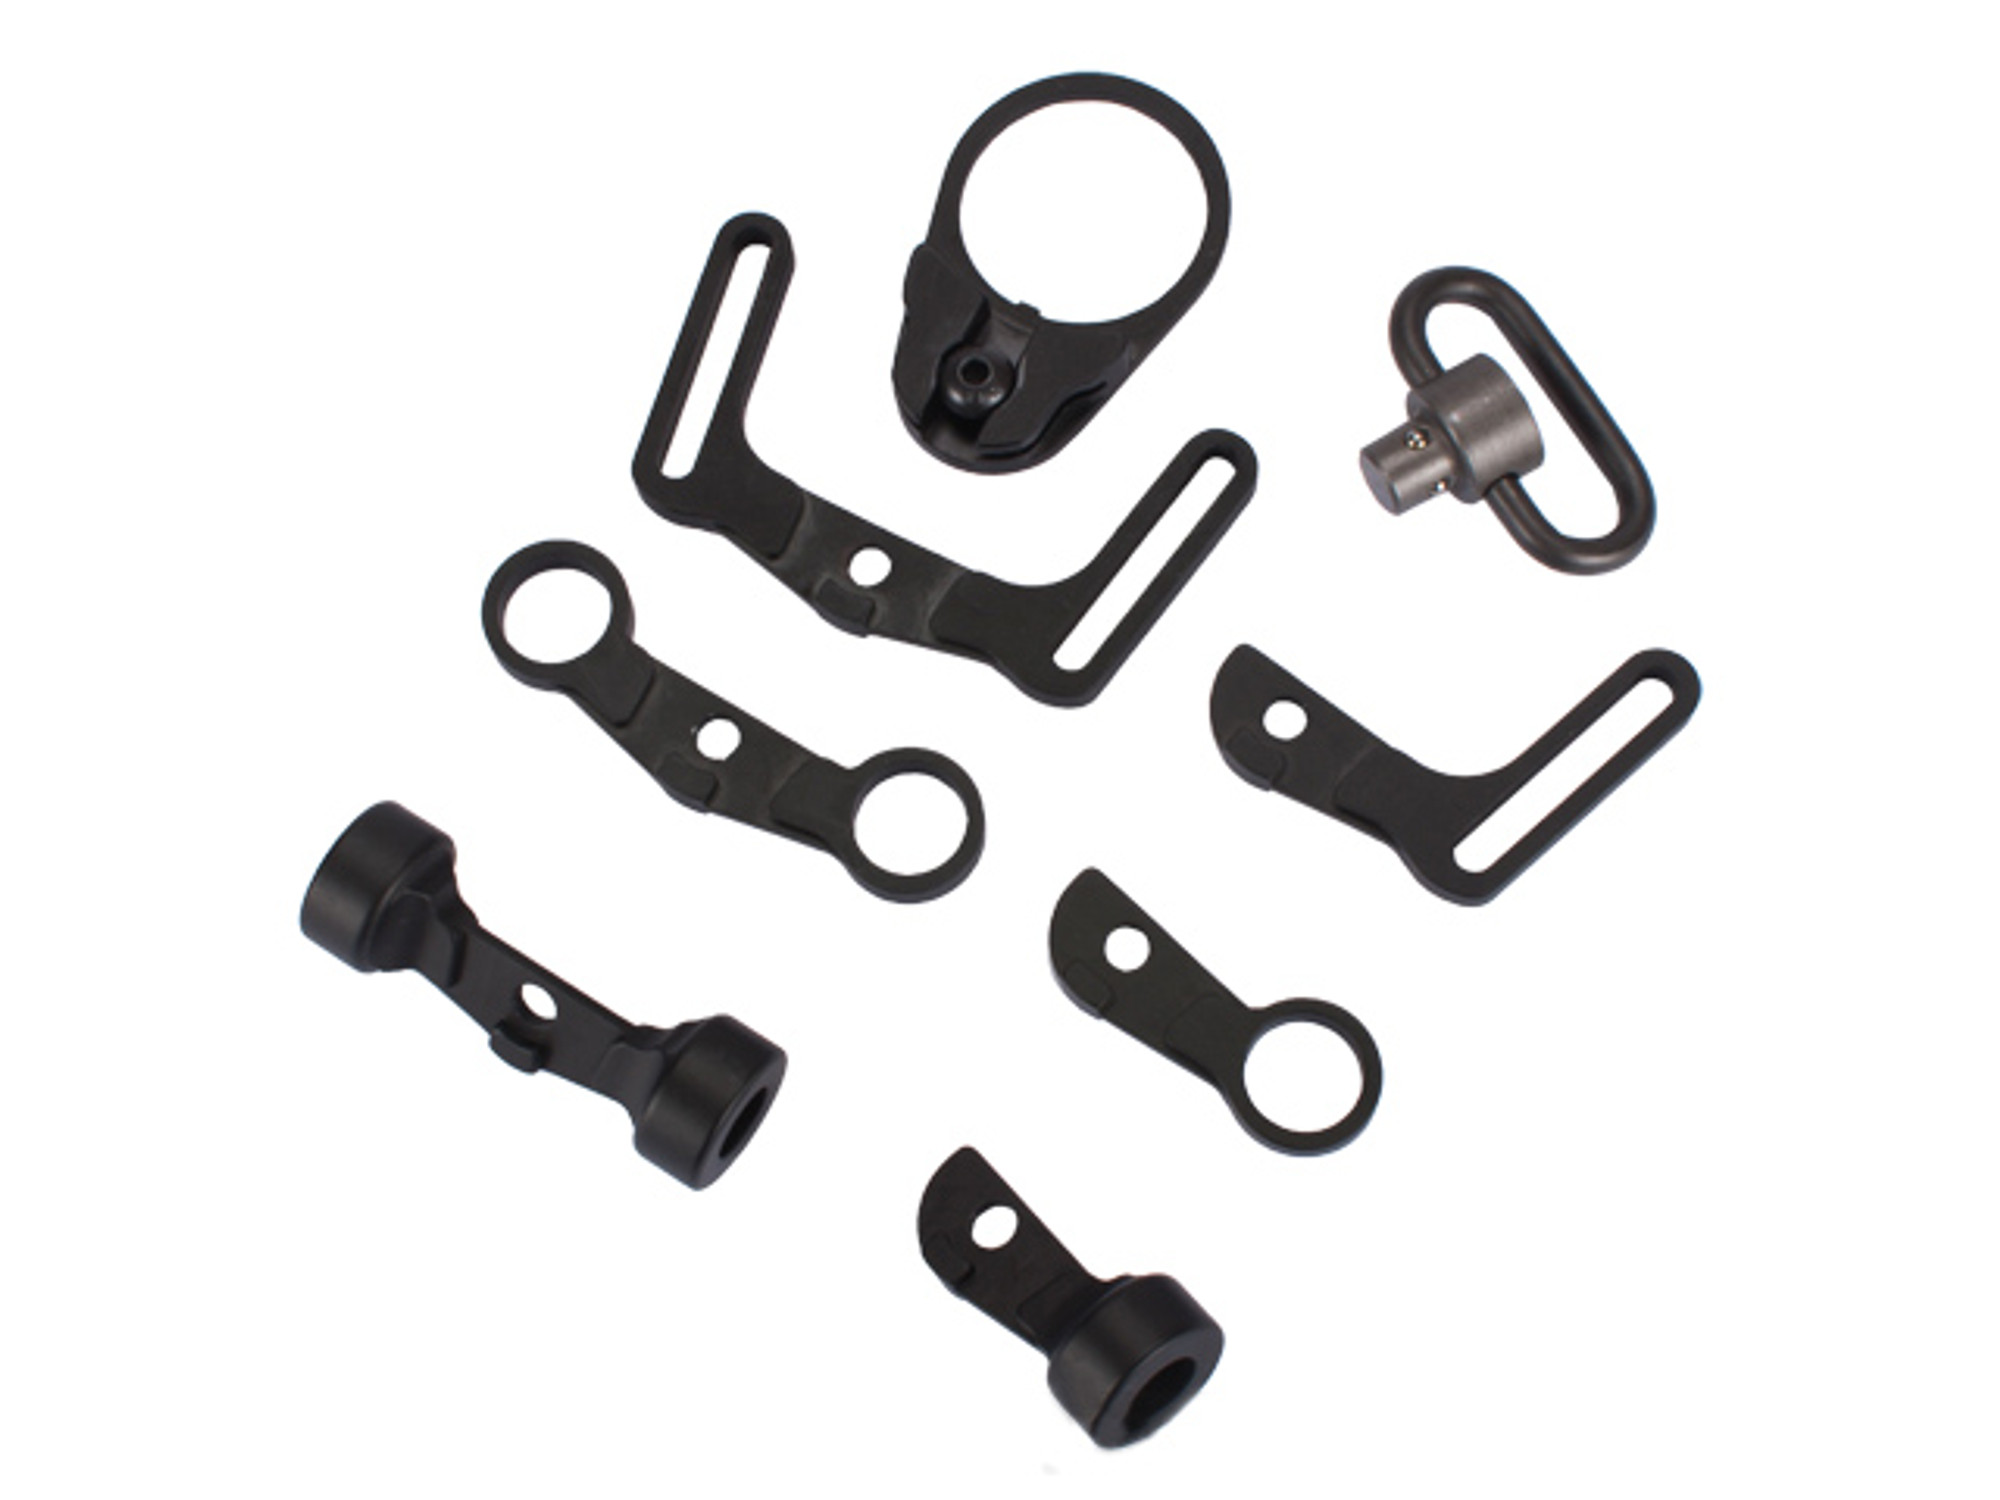 Element M39 Multi-Function Sling Adapter Set for M4 Series Airsoft AEG Rifles - Black